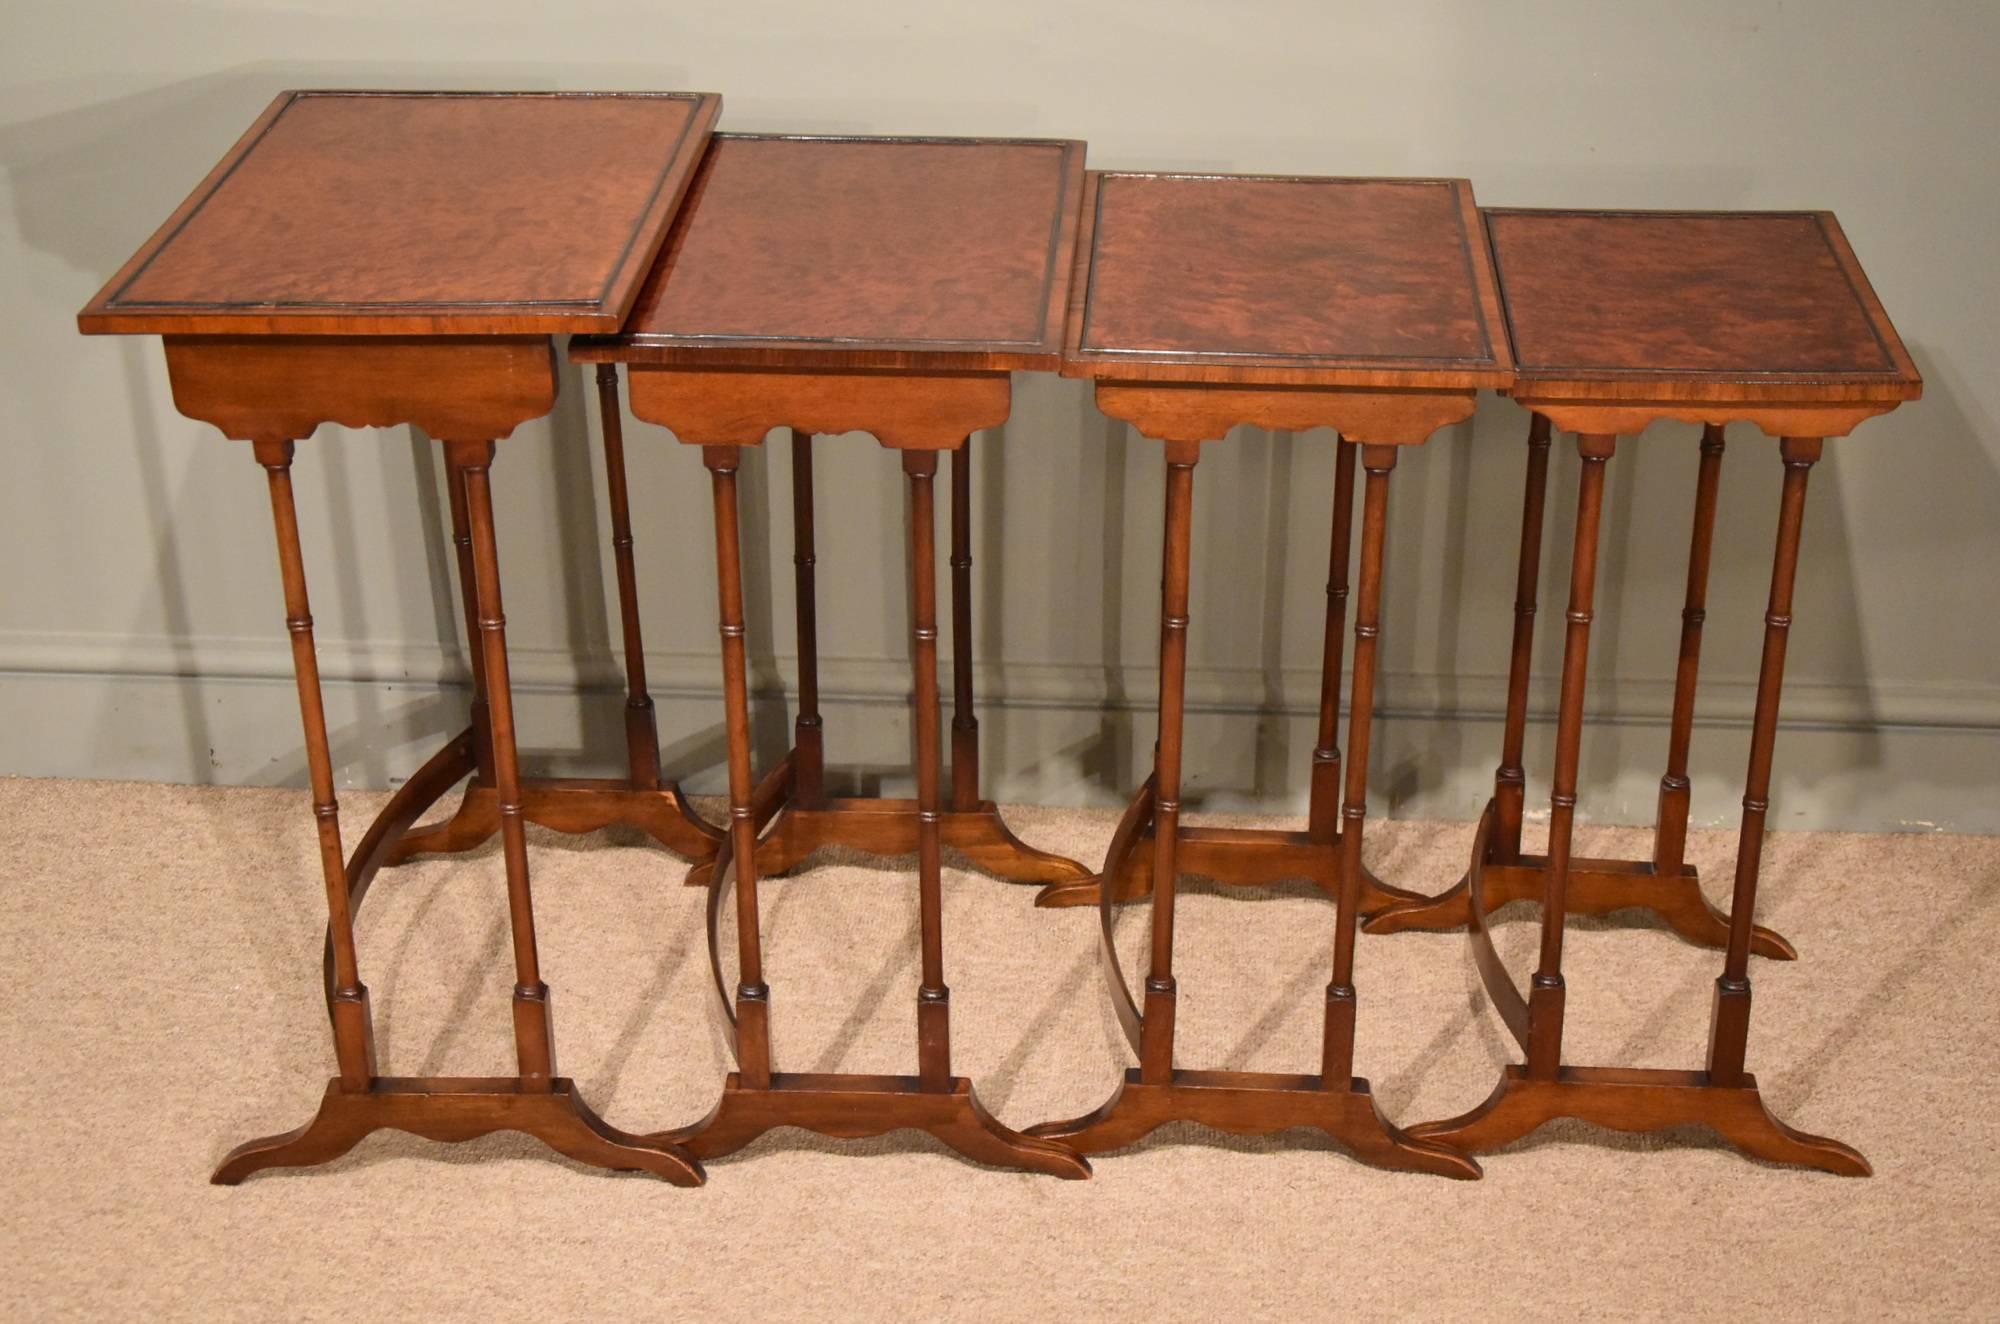 A good nest of four late 19th century thuya tables

Dimensions
Height 27